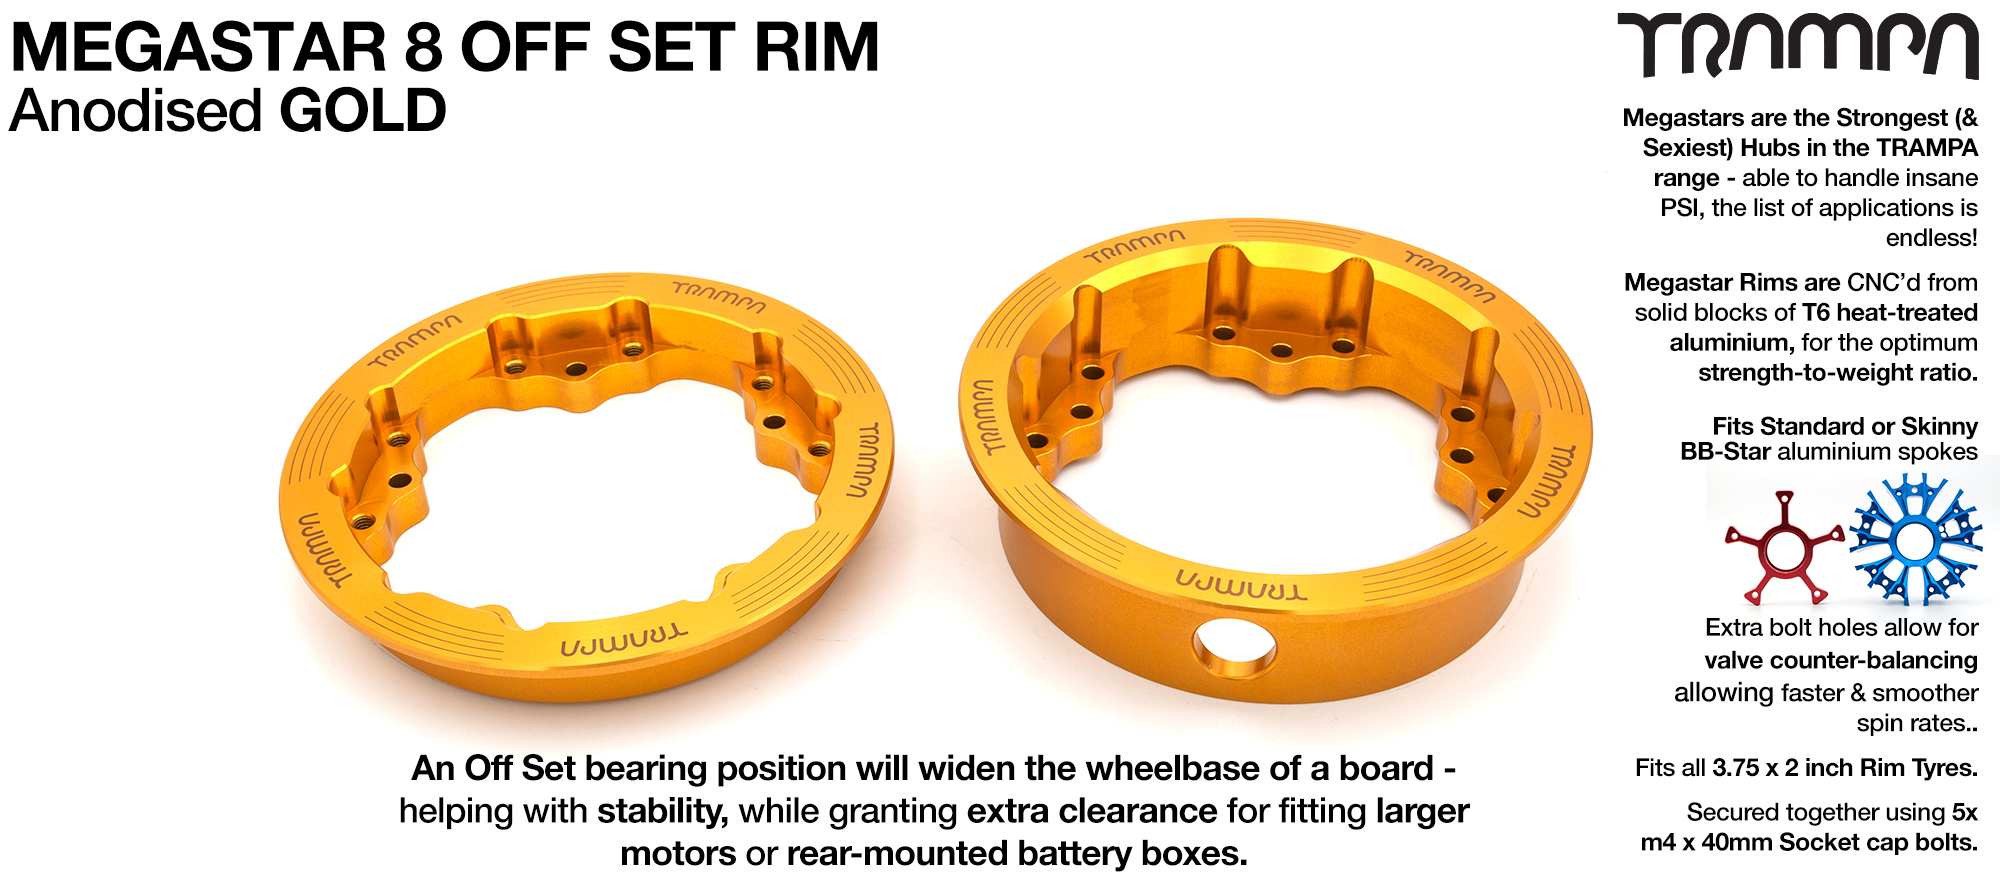 MEGASTAR 8 OS Rims Measure 3.75 x 2 Inch. The bearings are positioned OFF-SET widening the wheel base & accept all 3.75 Rim Tyres - GOLD 